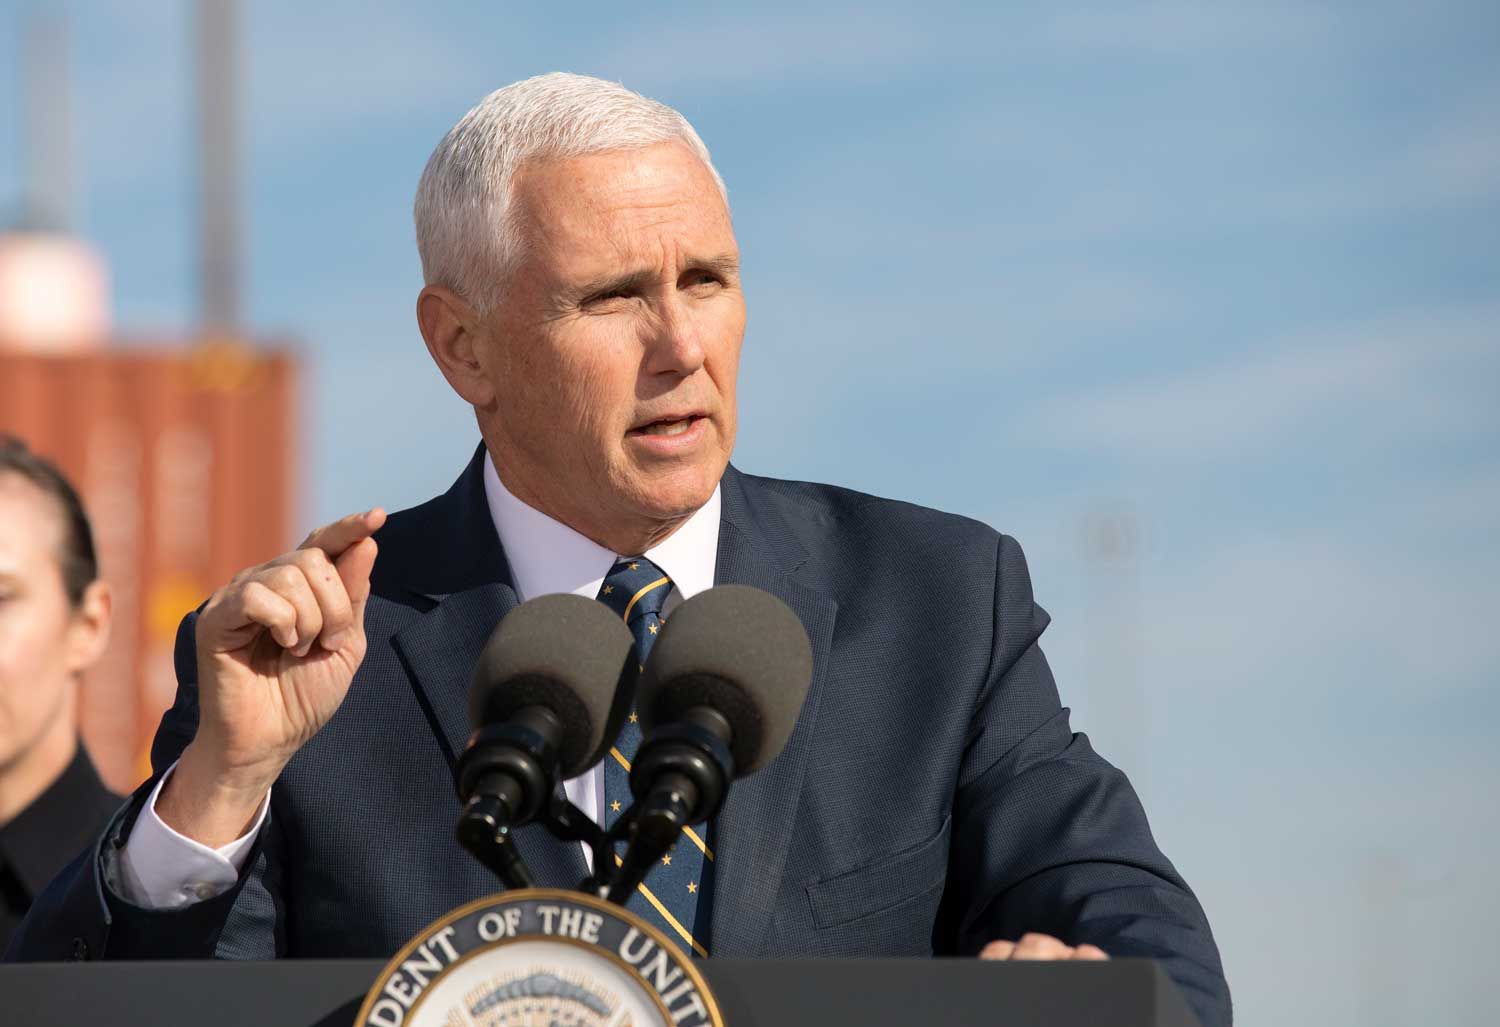 Vice president mike pence speaks at a podium in 2019